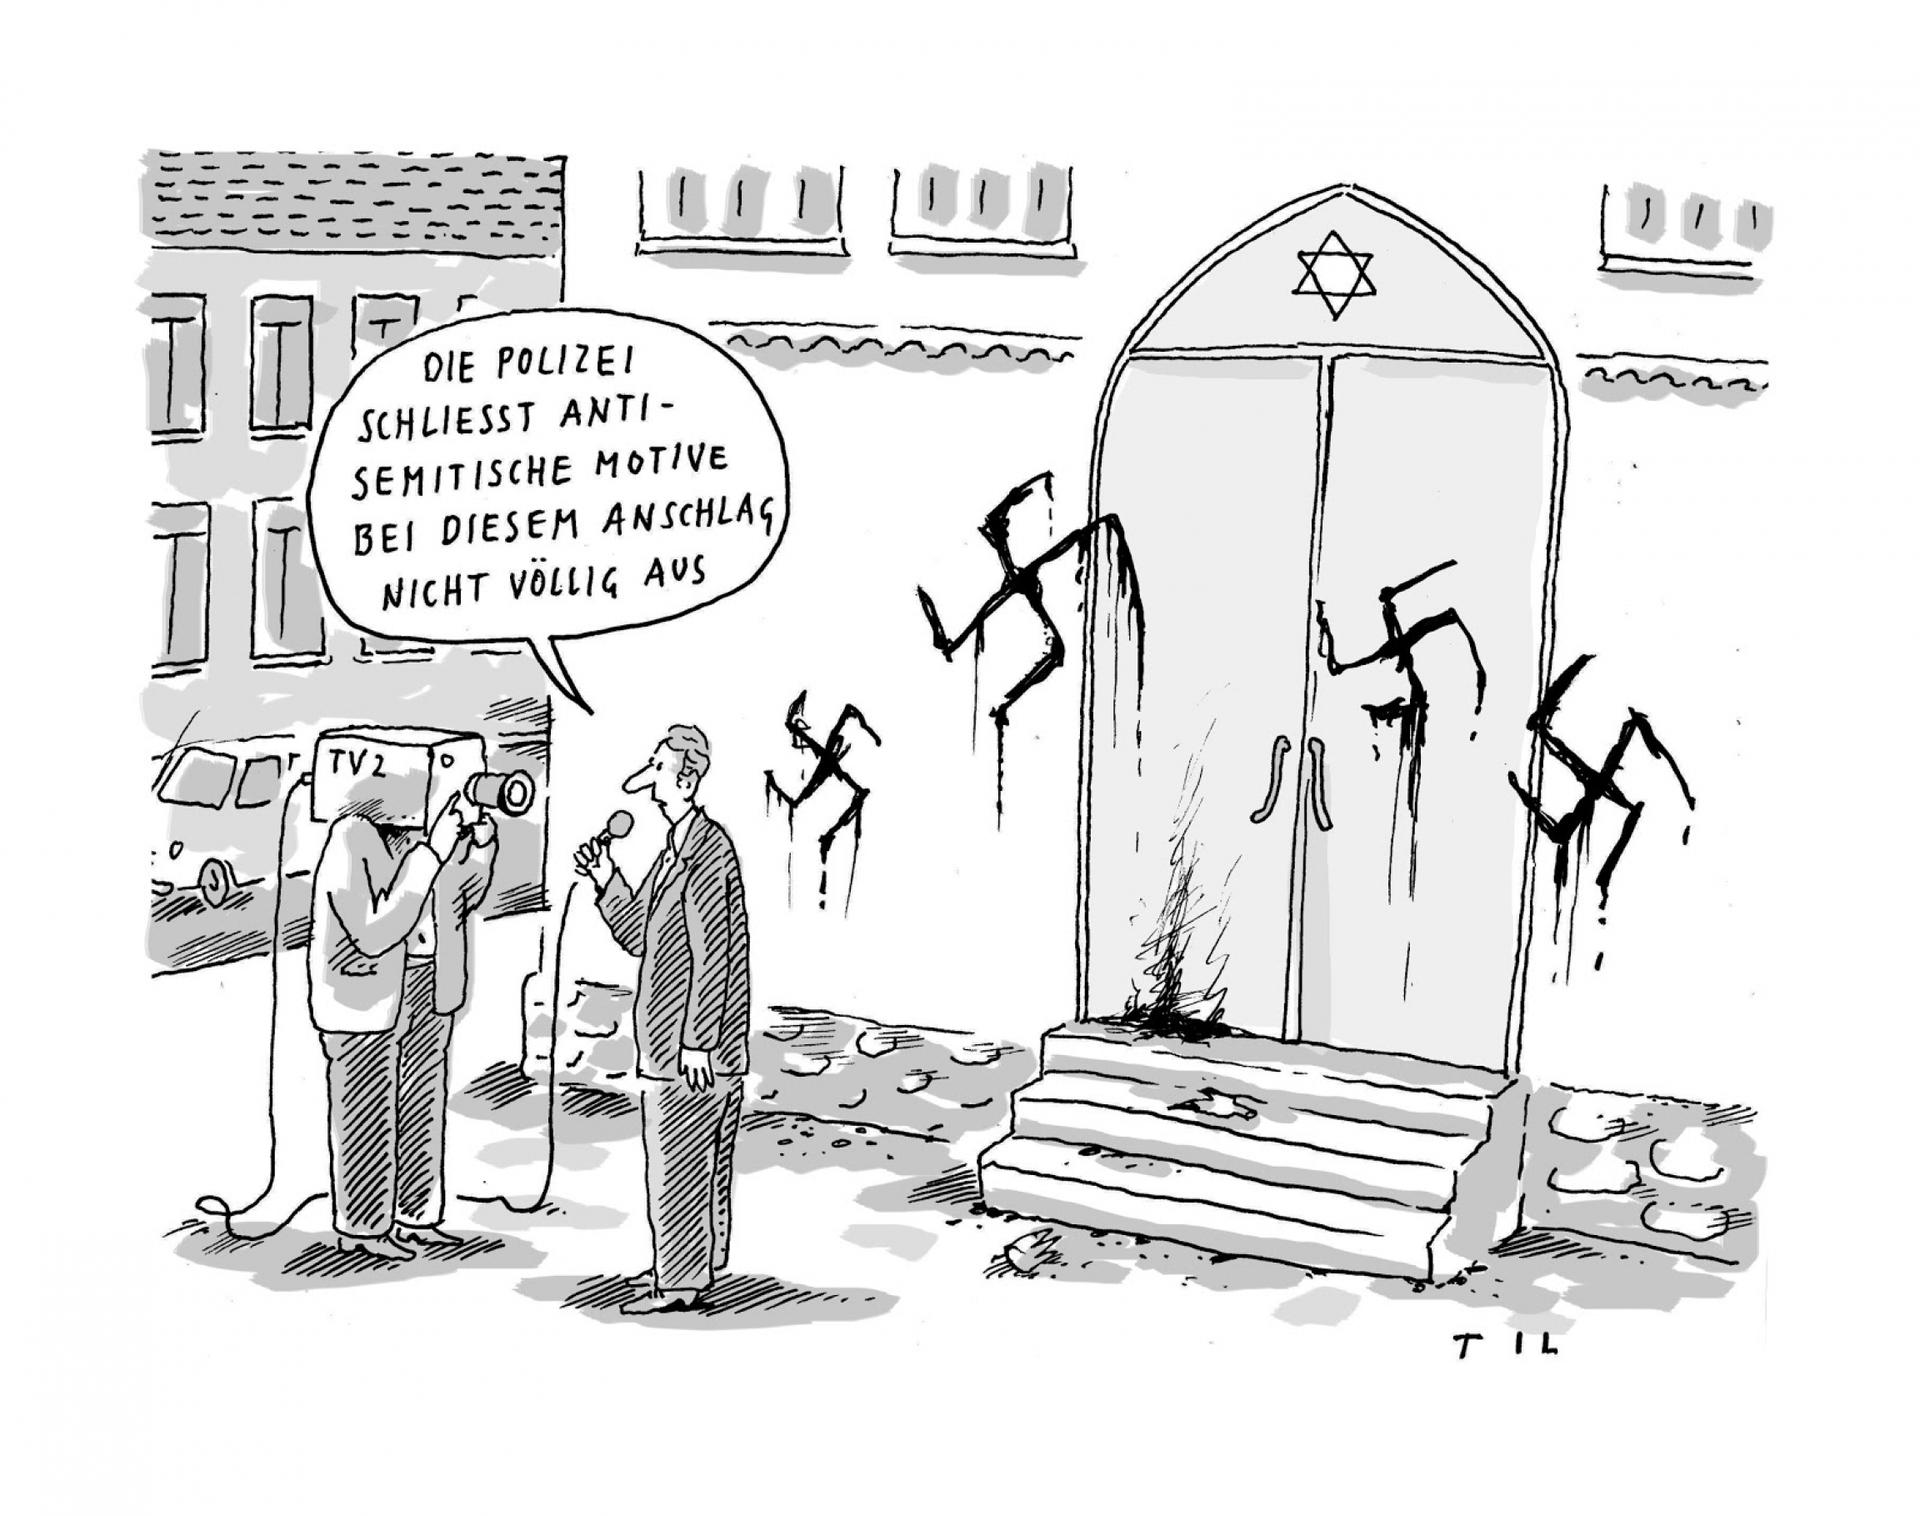 A black and white cartoon of four swastikas spray-painted on a synagogue with two people talking about who did it